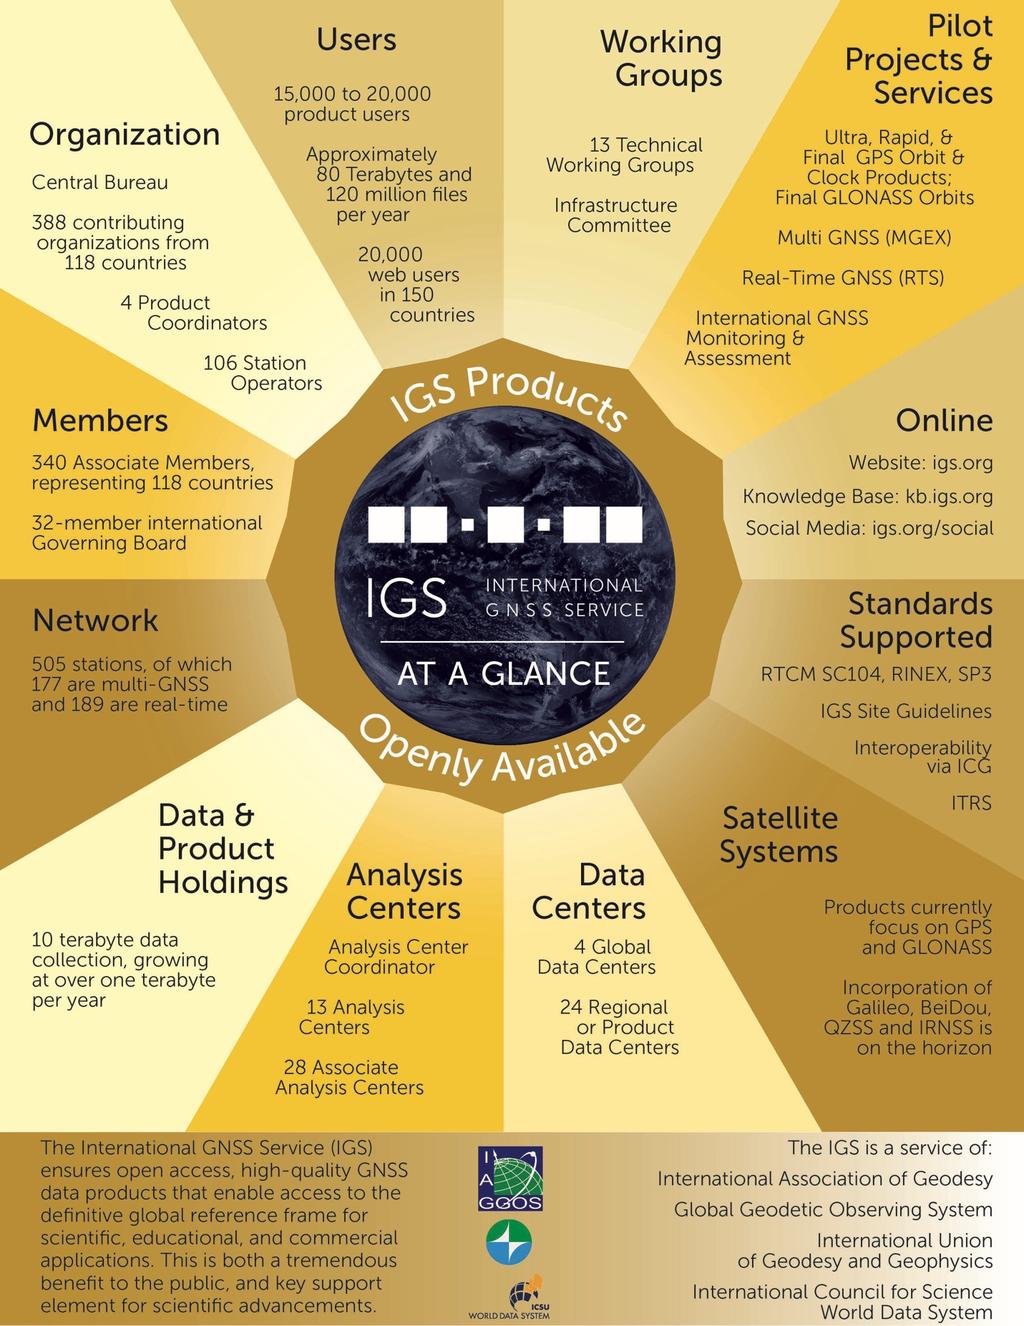 IGS Structure The IGS is a self-governed federation of 388 contributing organizations from 118 countries around the world that collectively operate a global infrastructure of tracking stations, data